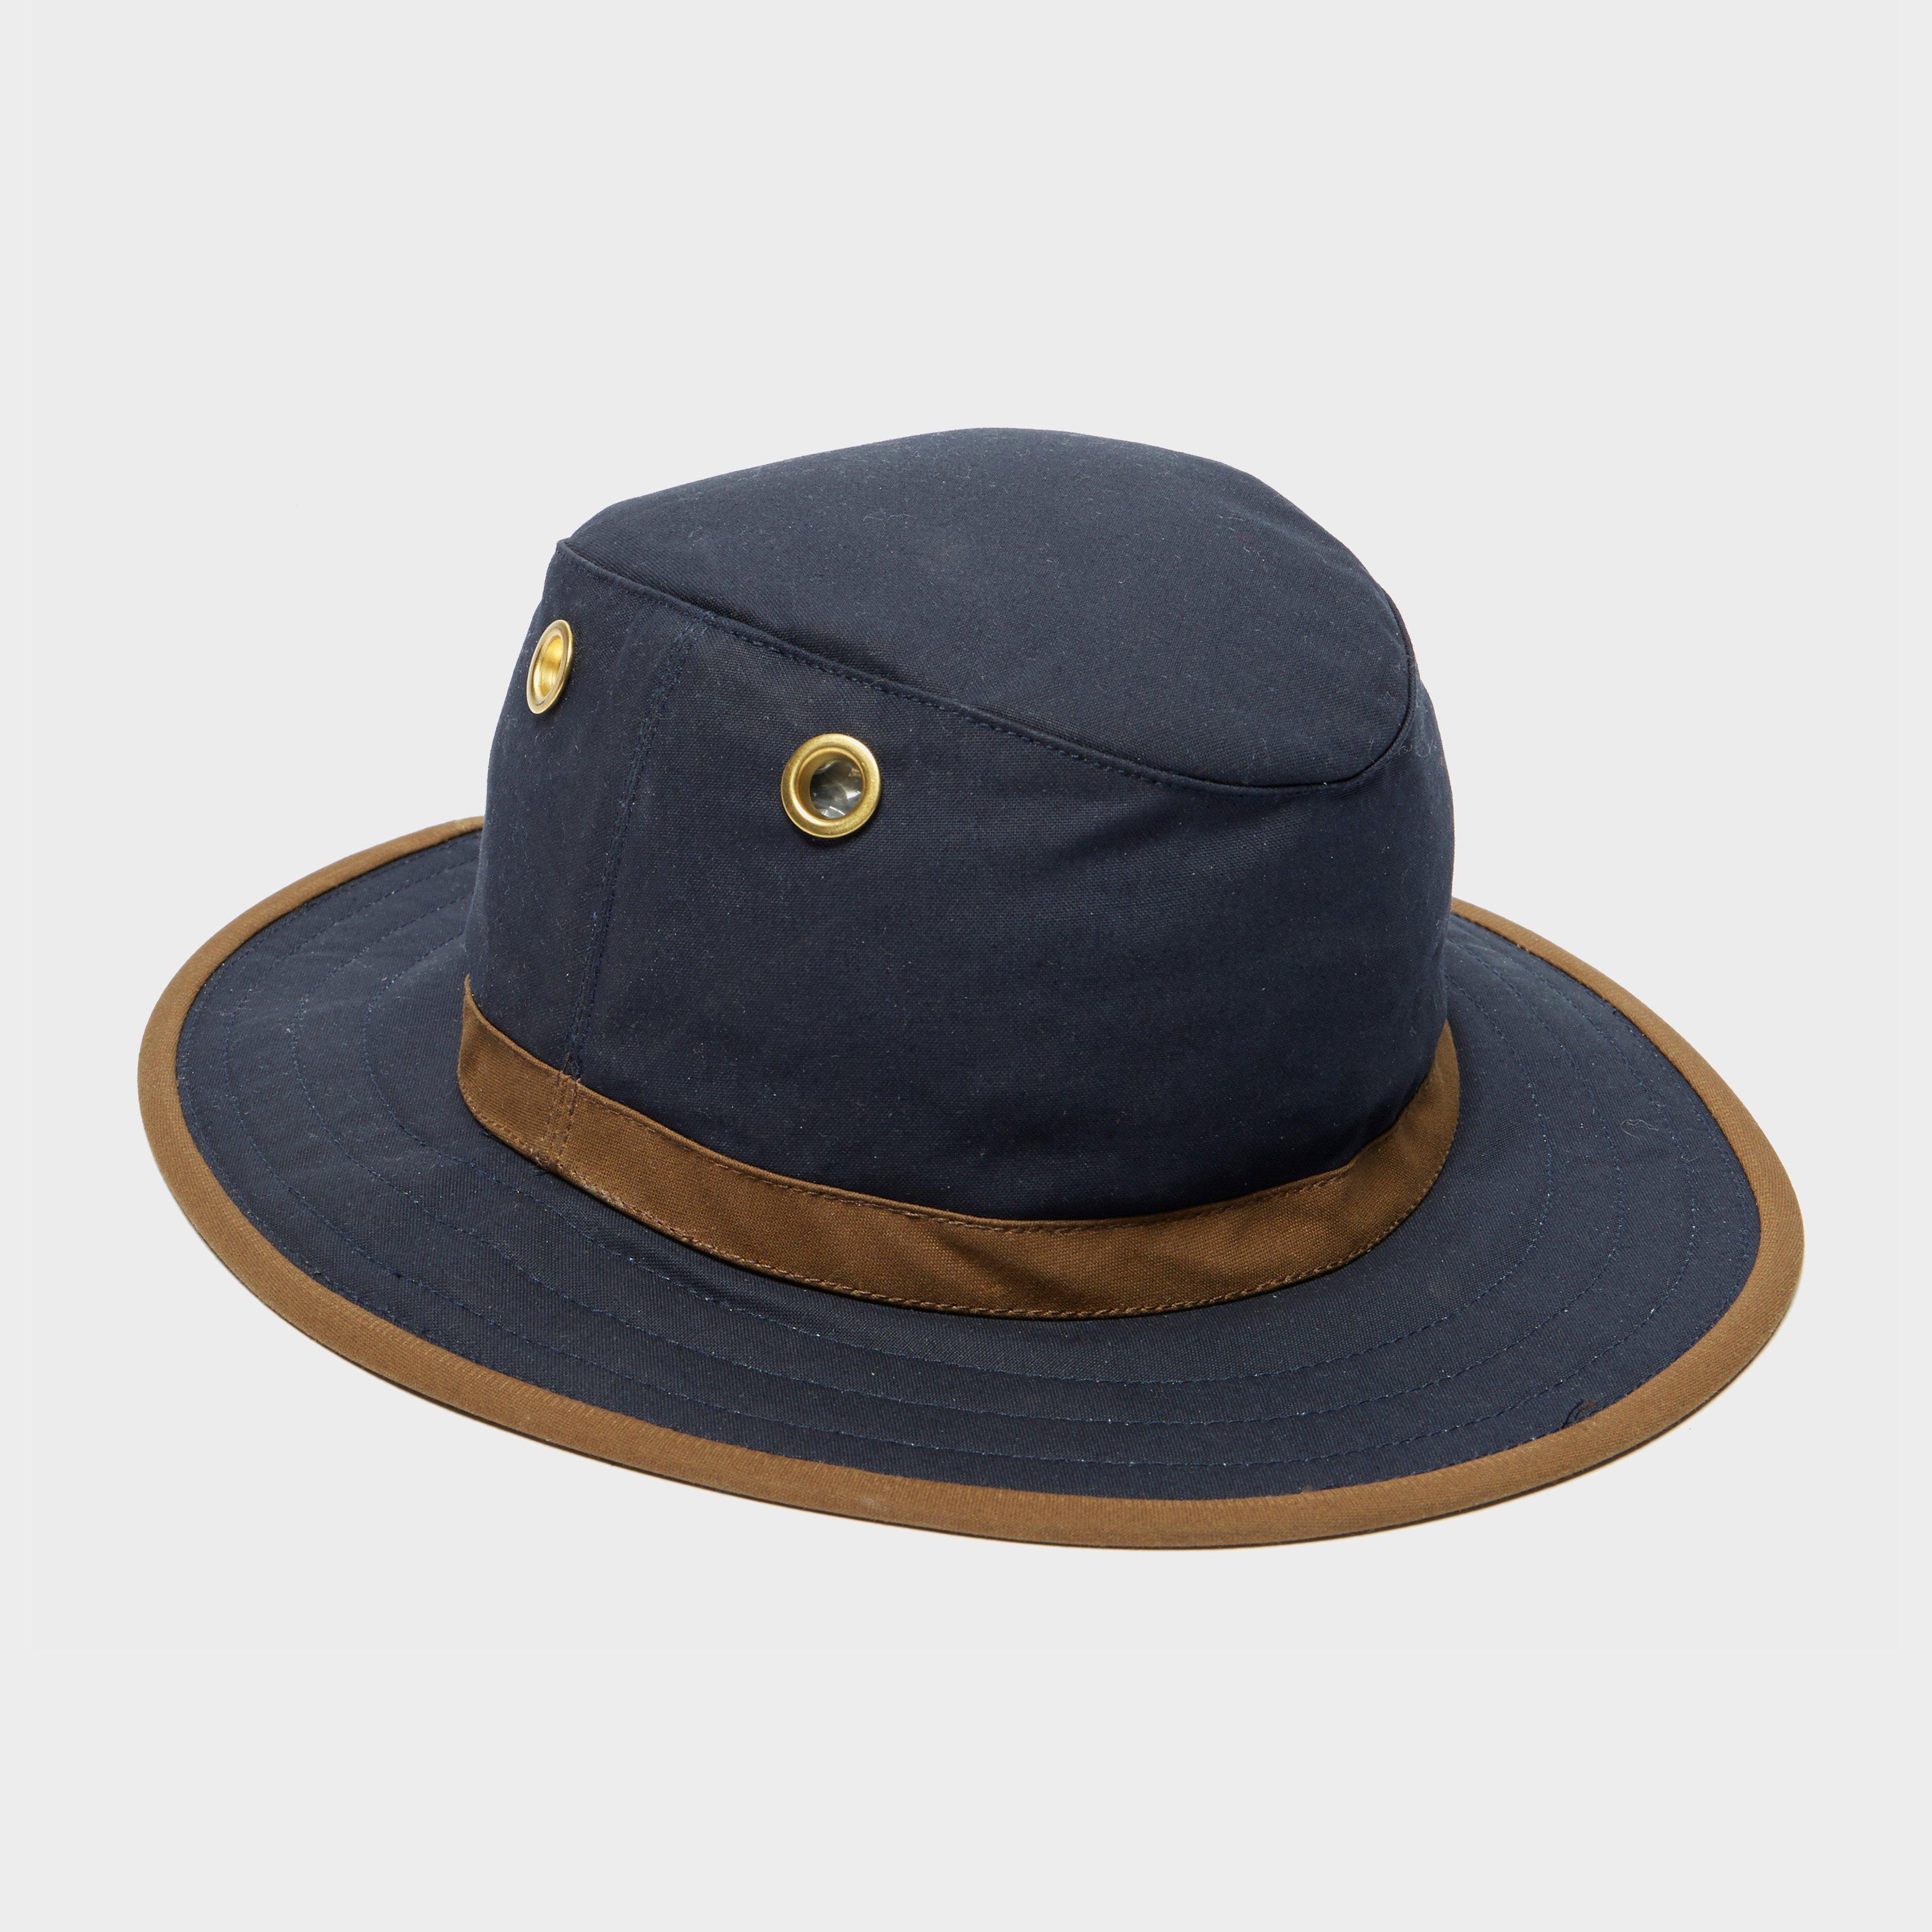  Tilley TWC7 Outback Waxed Cotton Hat, Navy